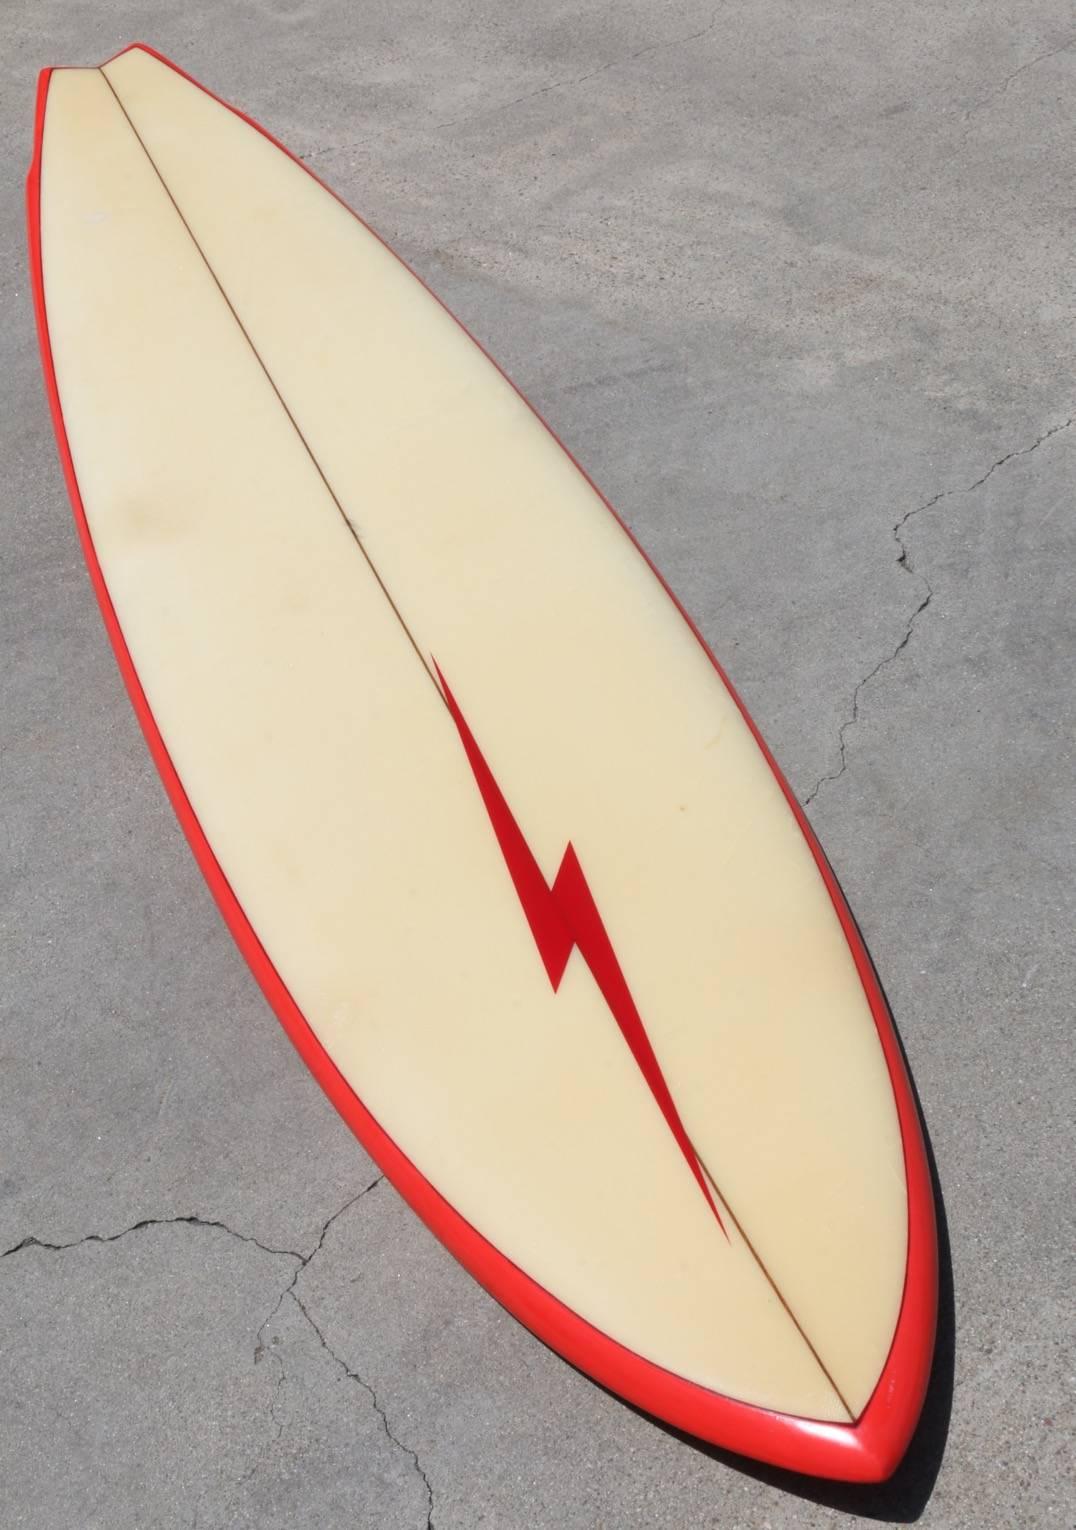 During the 1970s Lightning Bolt was shaped under license in California
by Hobie Surfboards in Dana Point, CA. Their master shaper was Terry
Martin, this is a Terry Martin shaped board! It's a classic board with
a big wave gun shape and